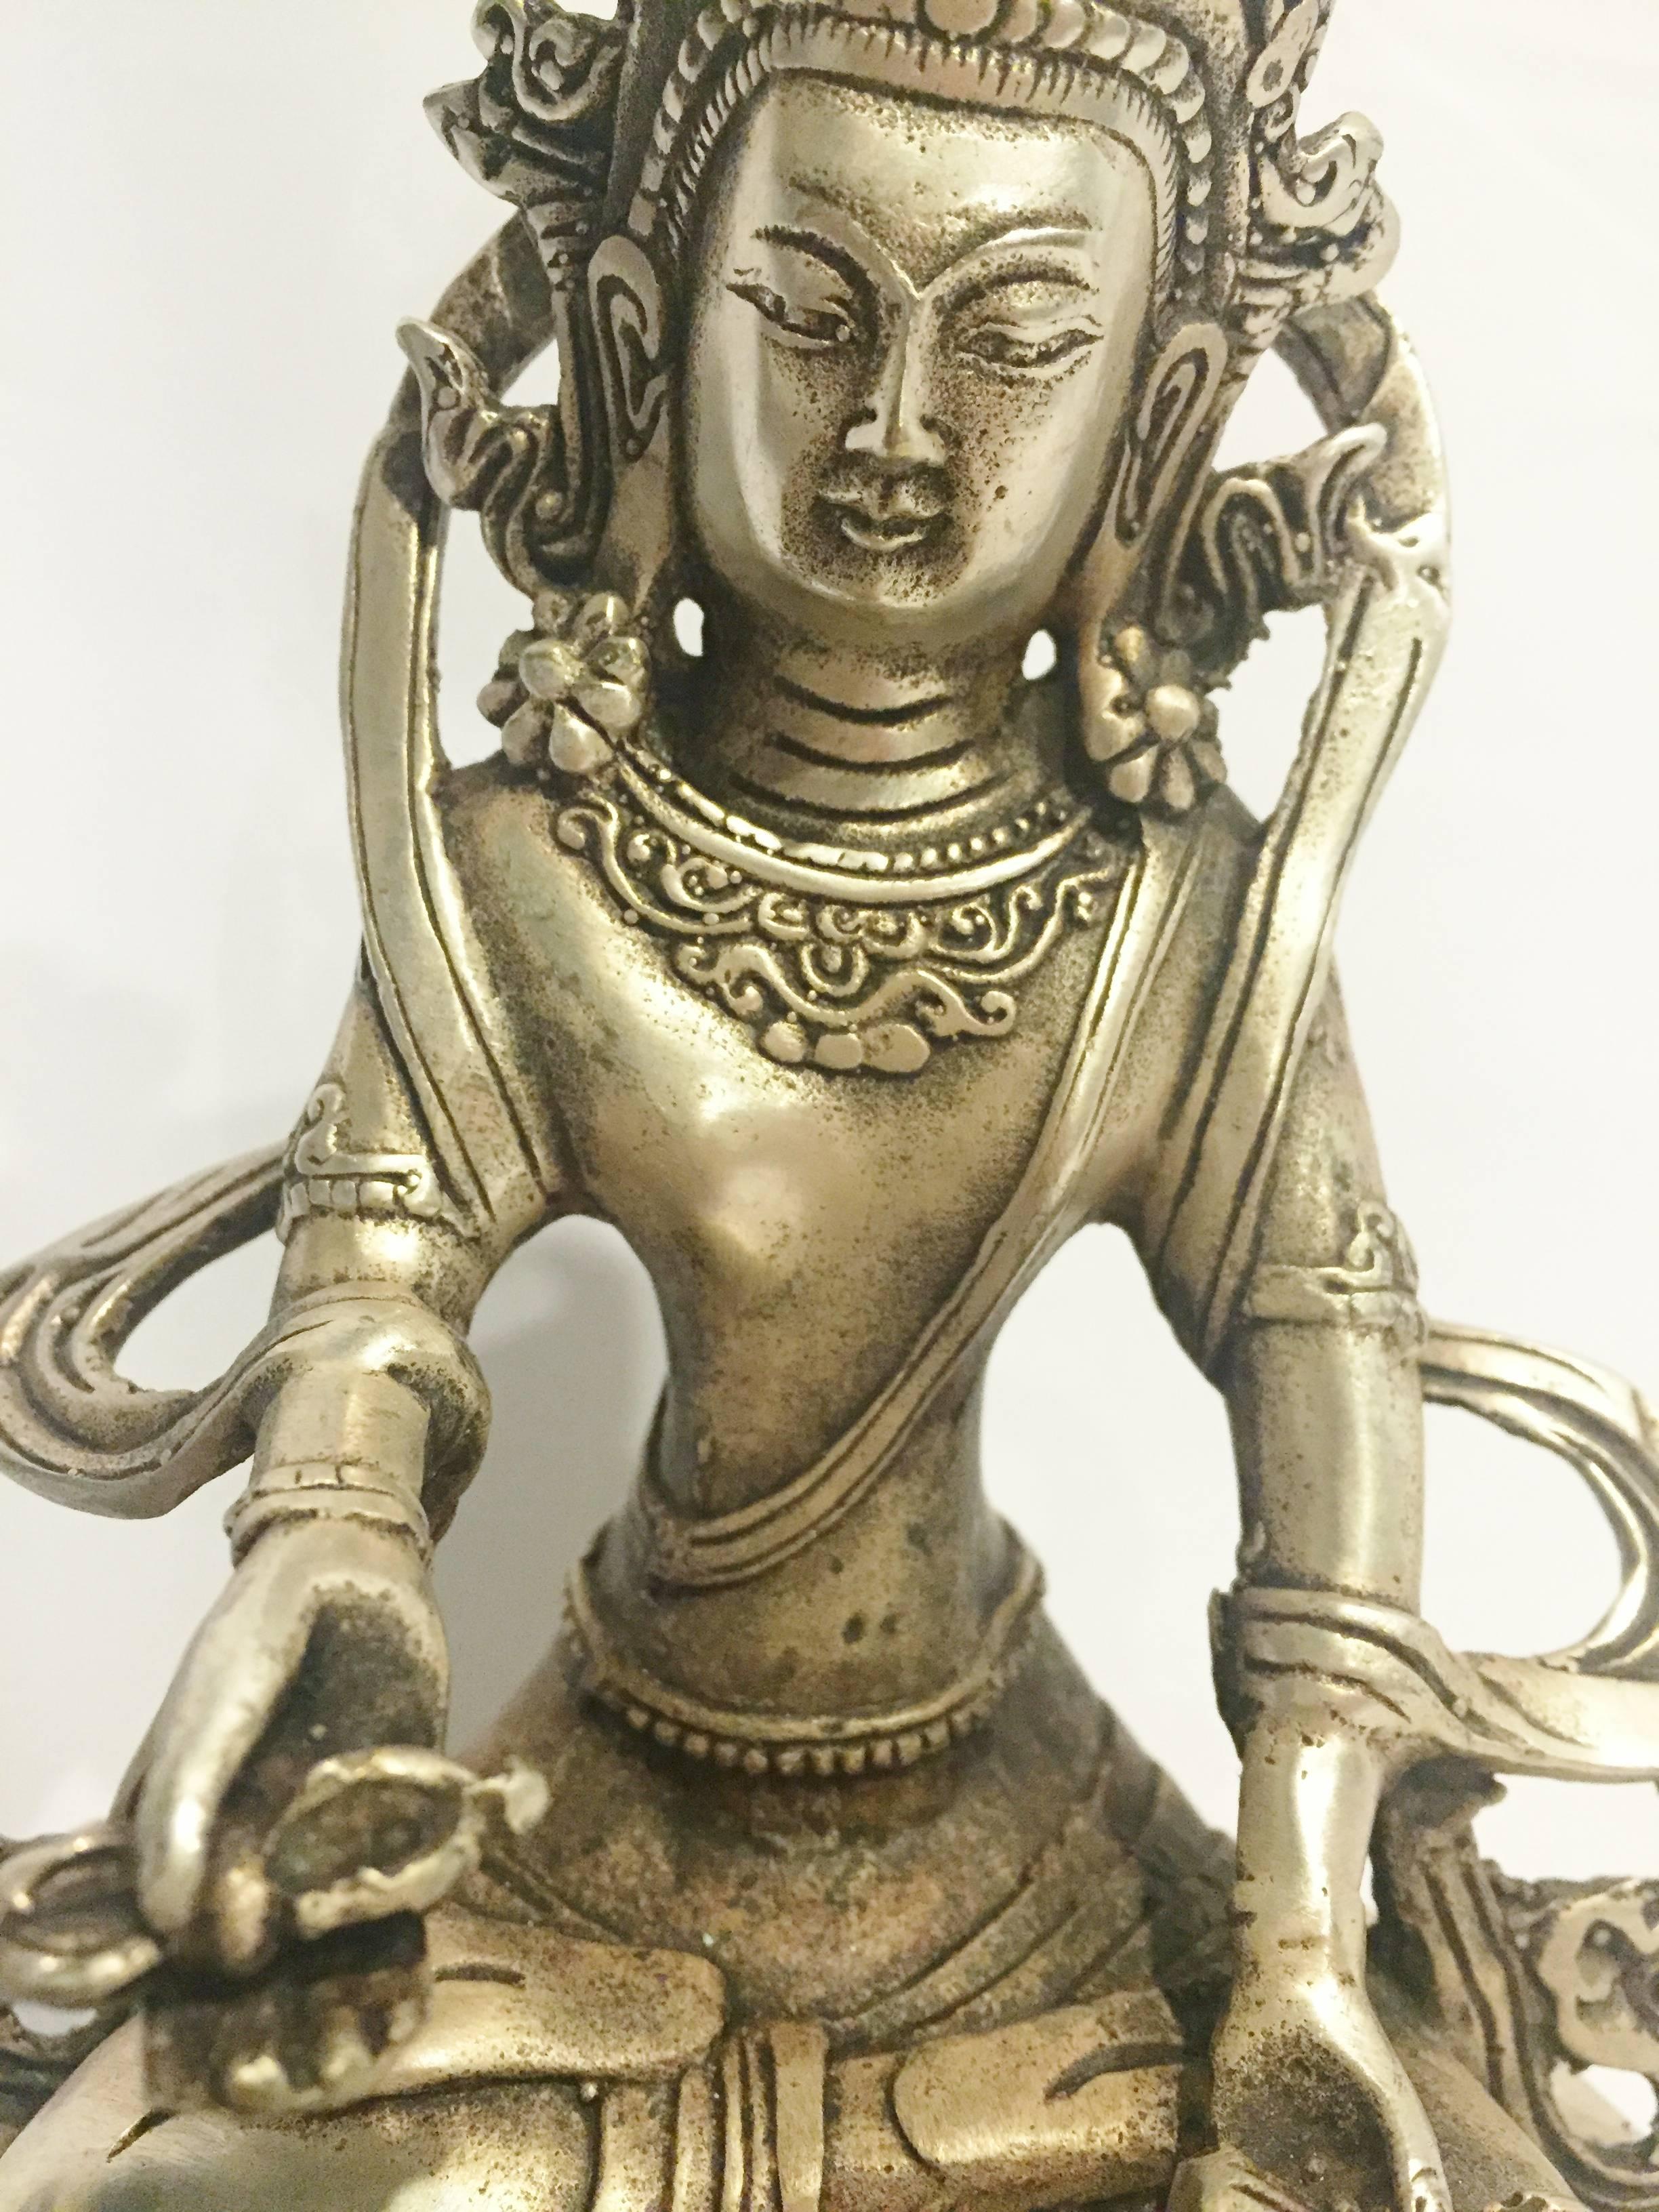 This exquisite piece is of the Tibetan deity that represents the whole power of male and female. The male, holding dorji, a scepter to rid evil spirits, represents 